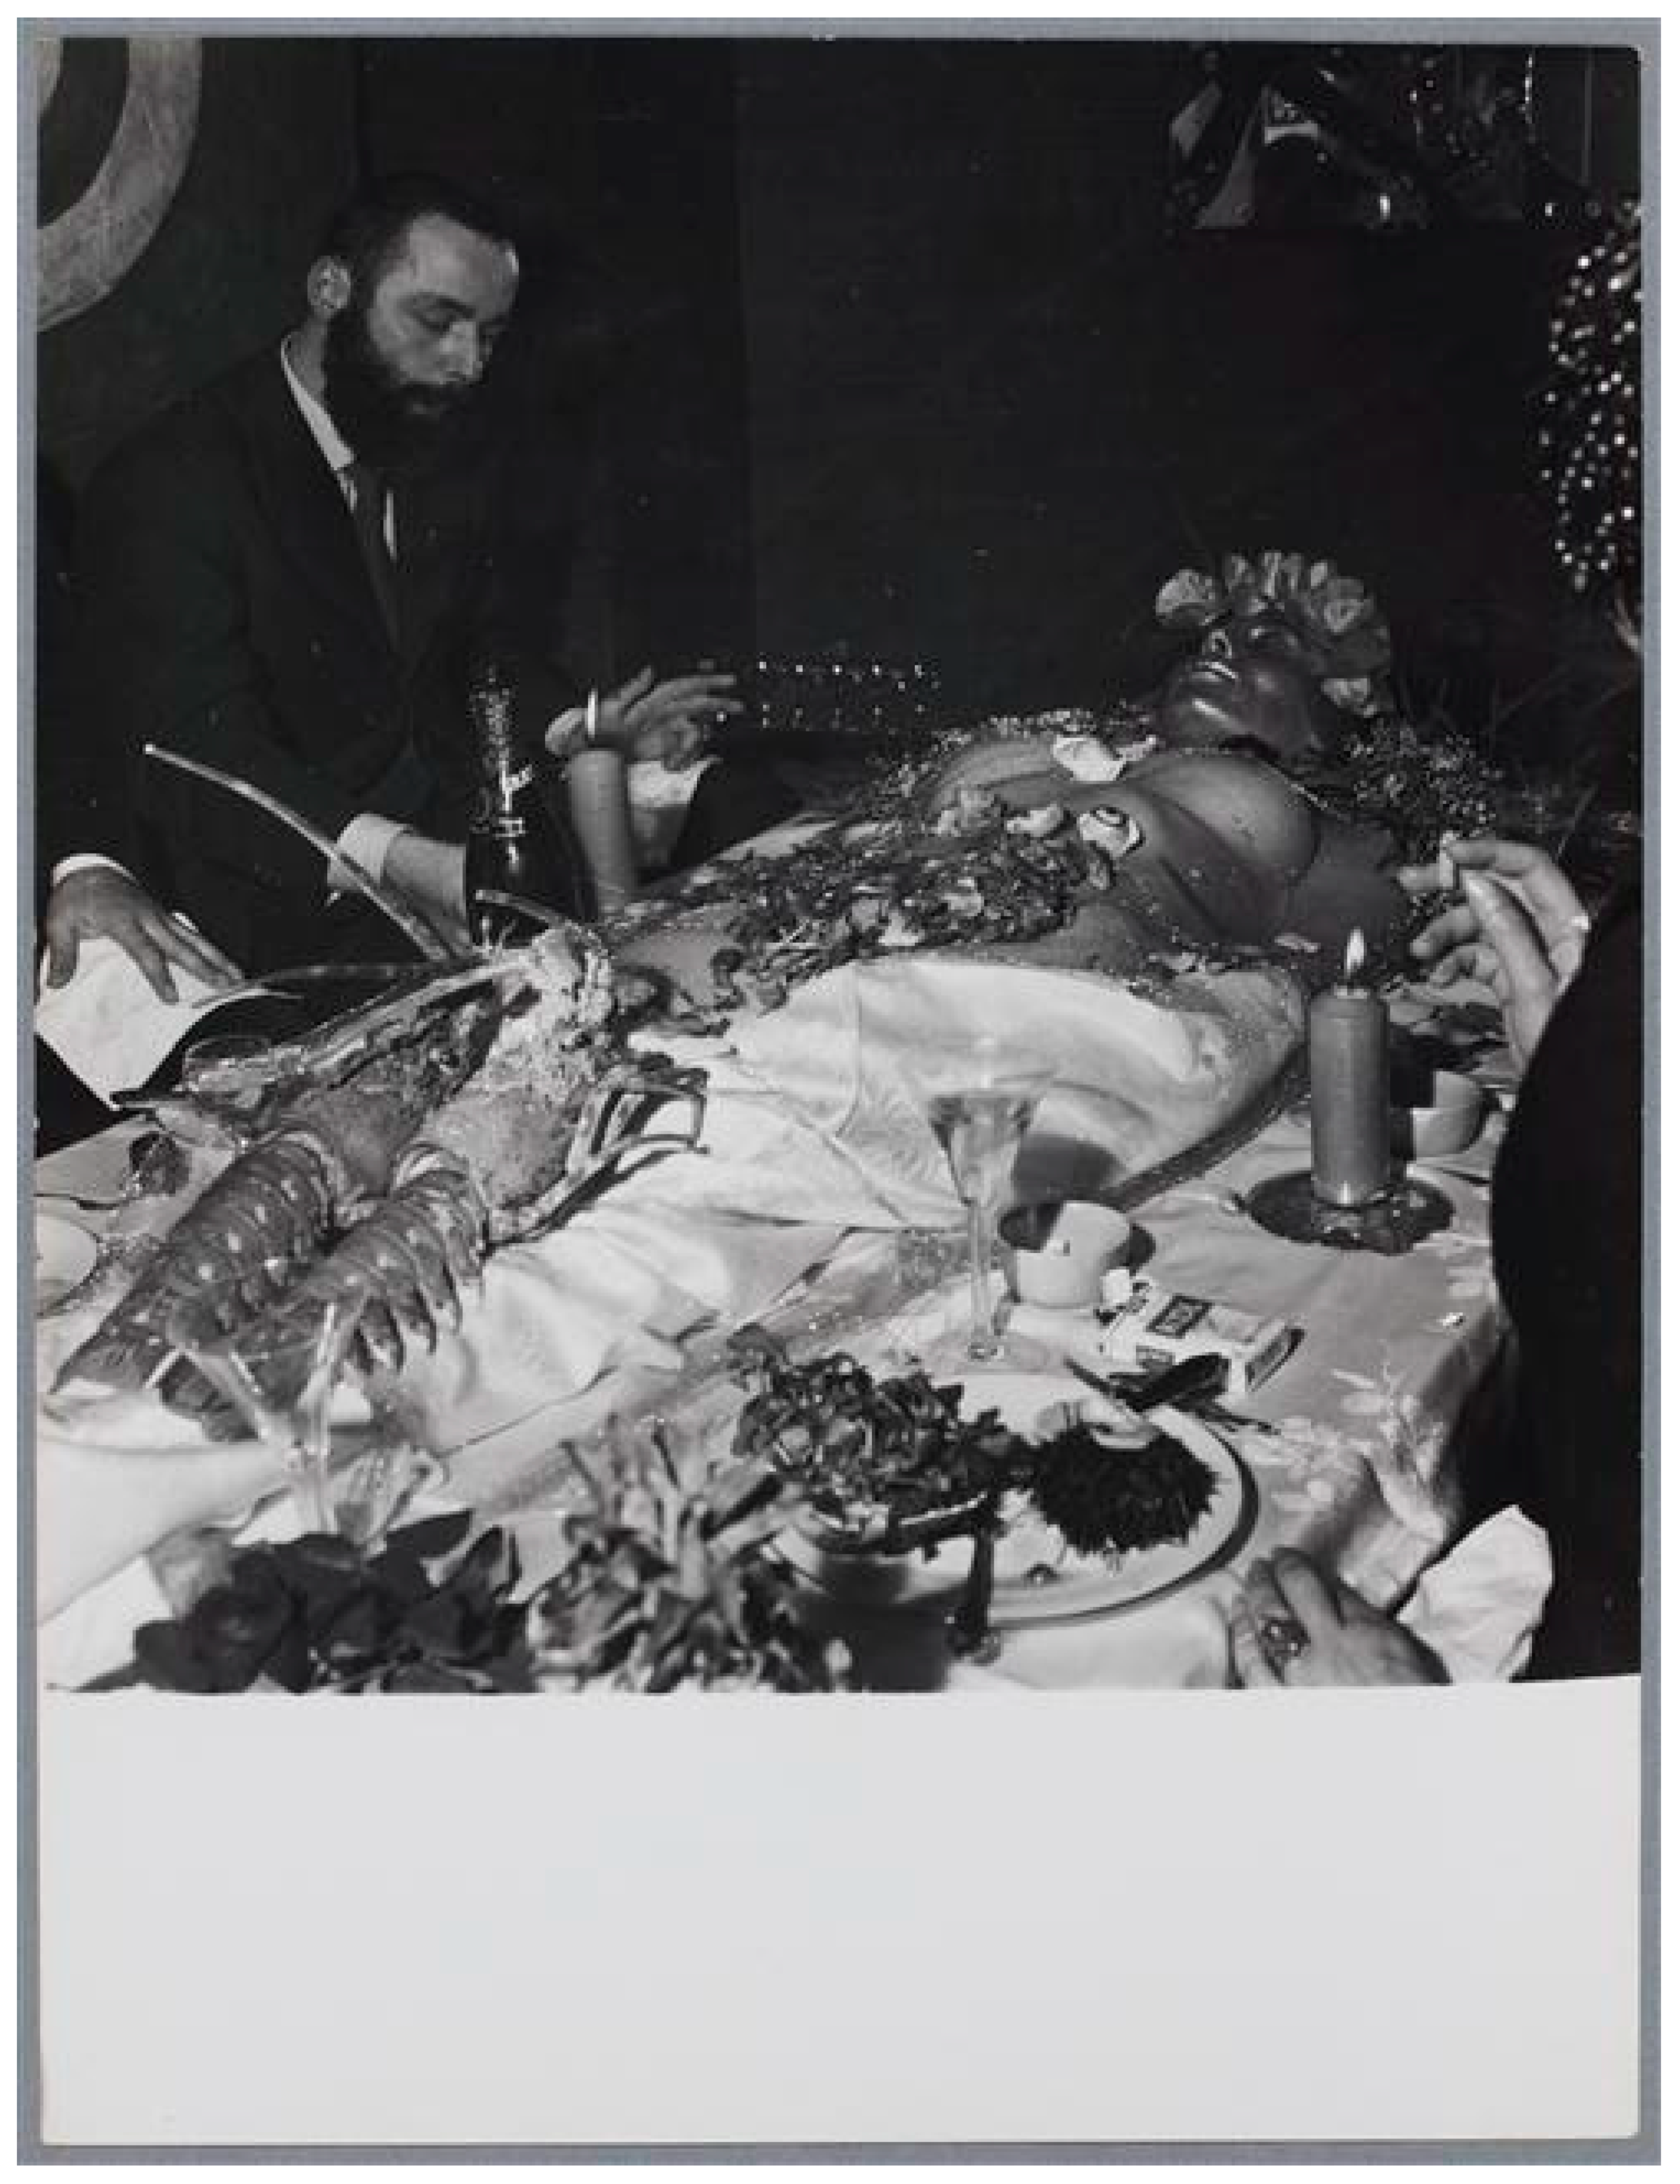 Arts | Free Full-Text | Between Spring Banquet and Cannibal Banquet:  Cannibalistic Imagery in Meret Oppenheim’s Works